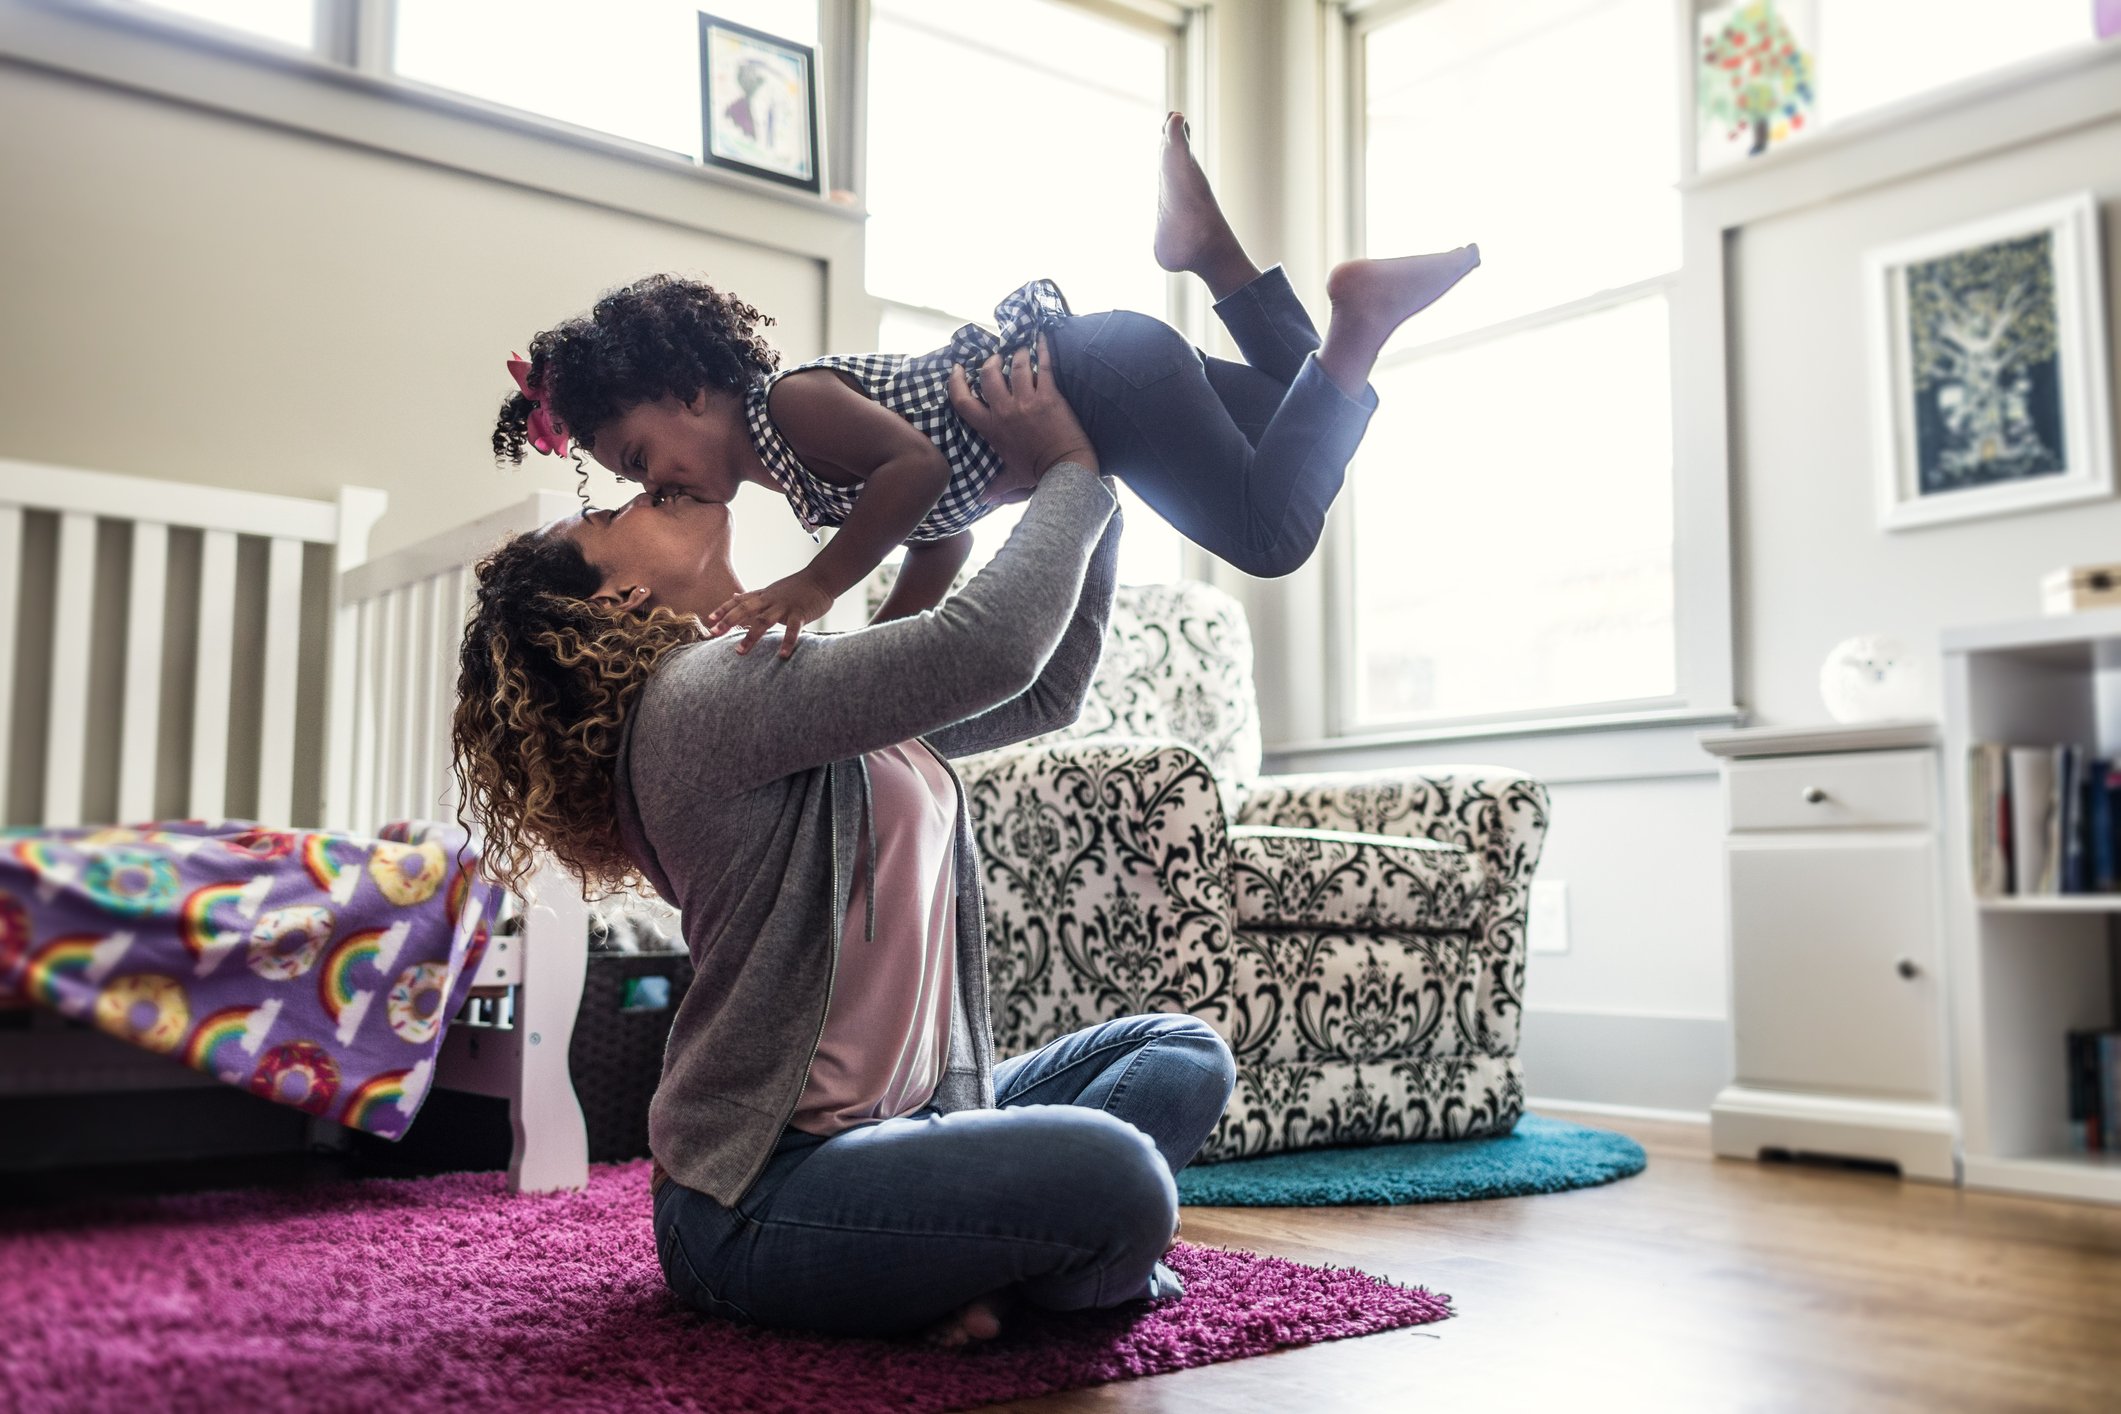 Mother and daughter playing on bedroom floor | Photo: Getty Images